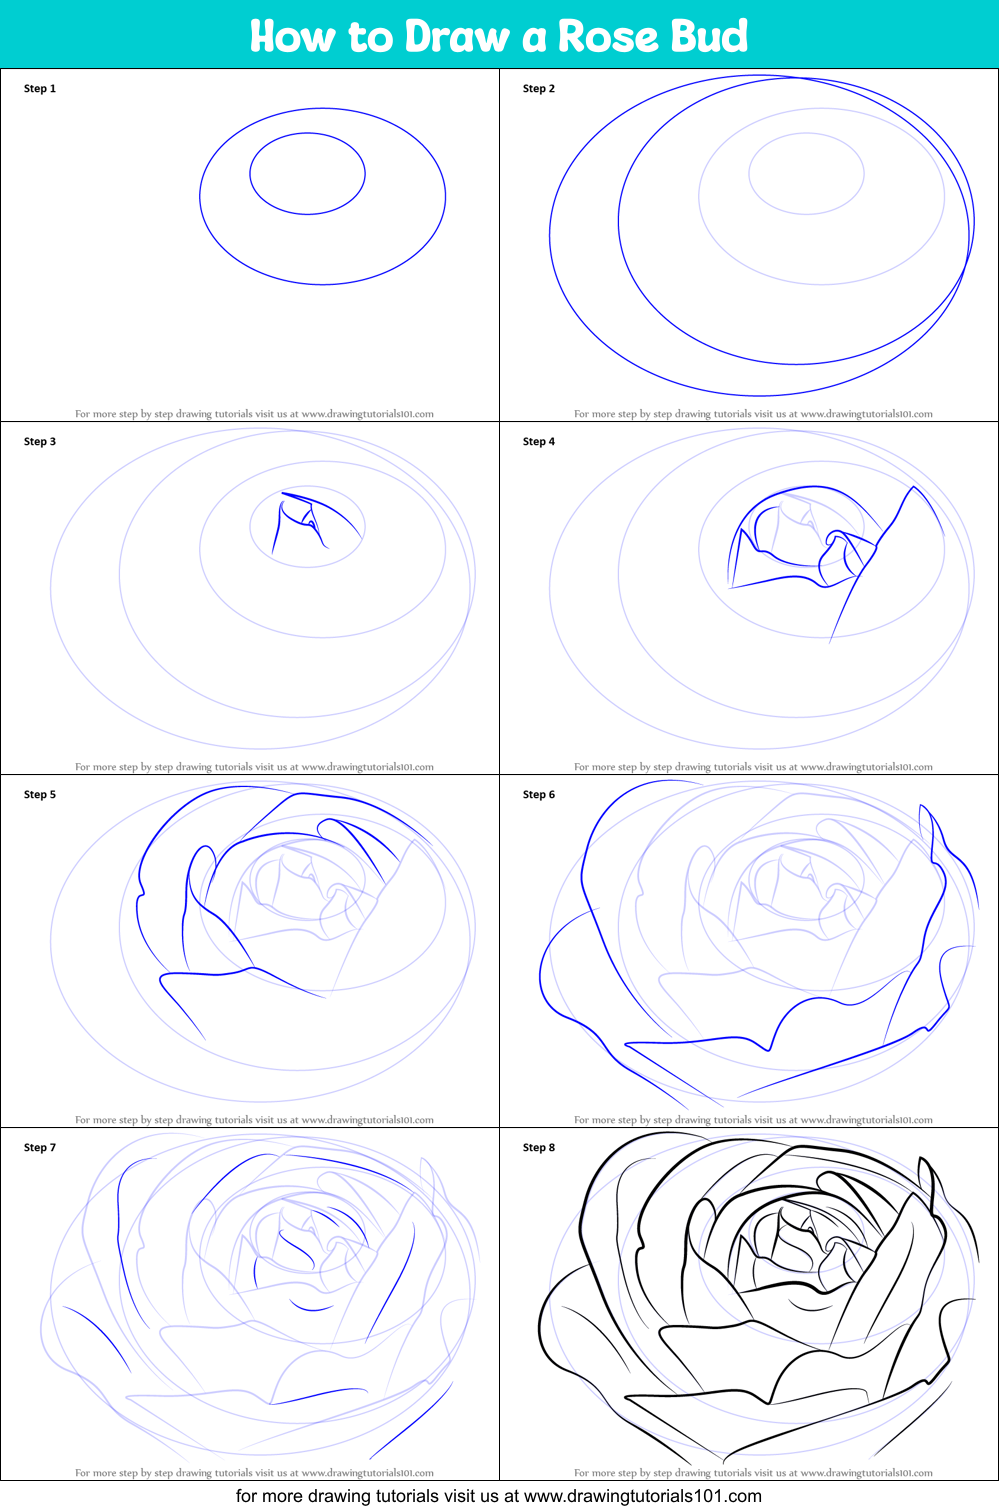 How to Draw a Rose Bud printable step by step drawing sheet